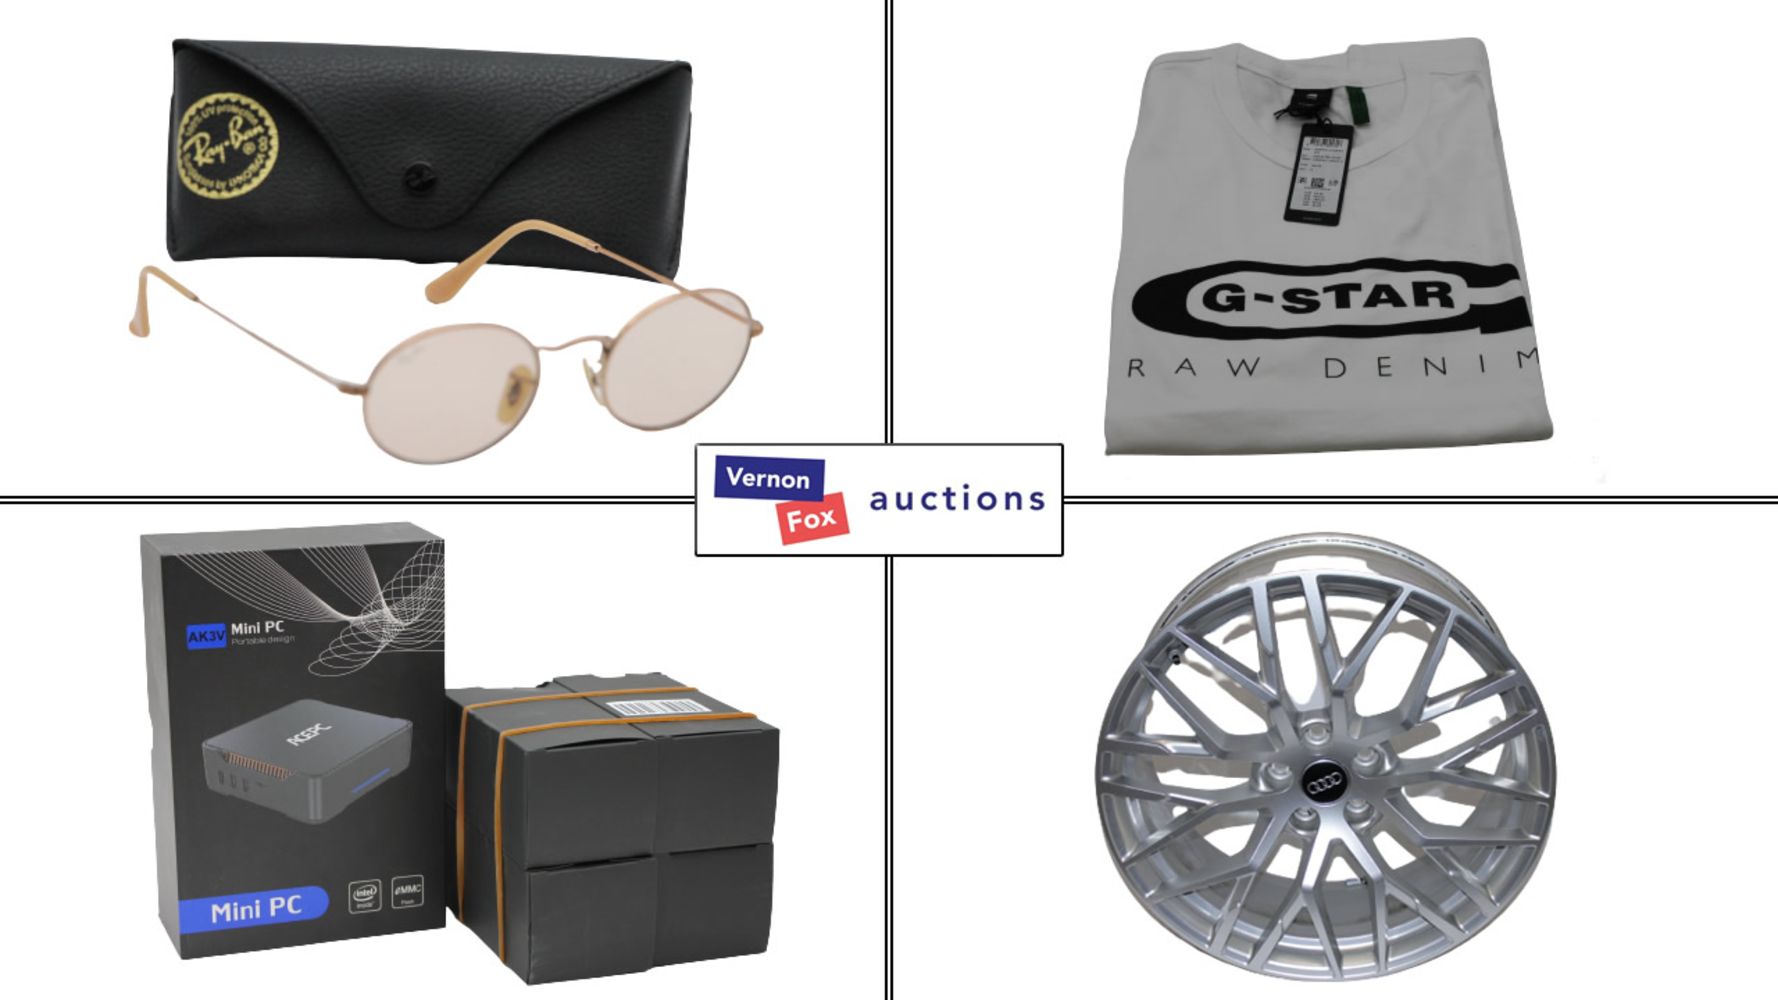 TIMED ONLINE AUCTION: Discounted Commercial Goods, from 10% of Retail Price, including Clothes, IT, Homewares and more, with FREE UK DELIVERY!